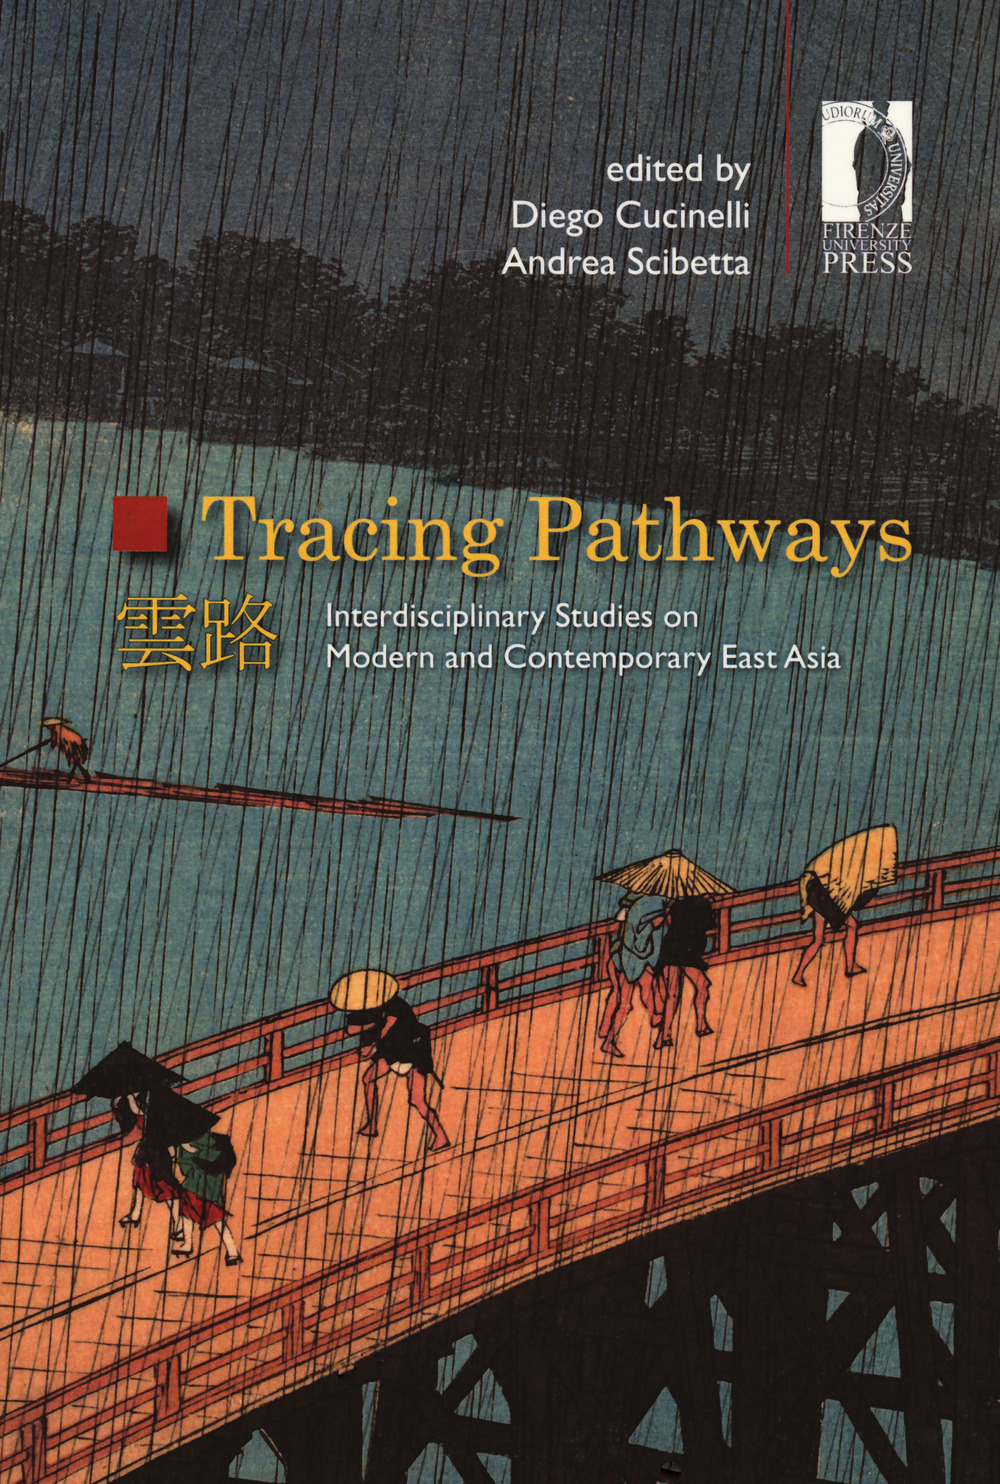 Tracing pathways. Interdisciplinary studies on modern and contemprary East Asia